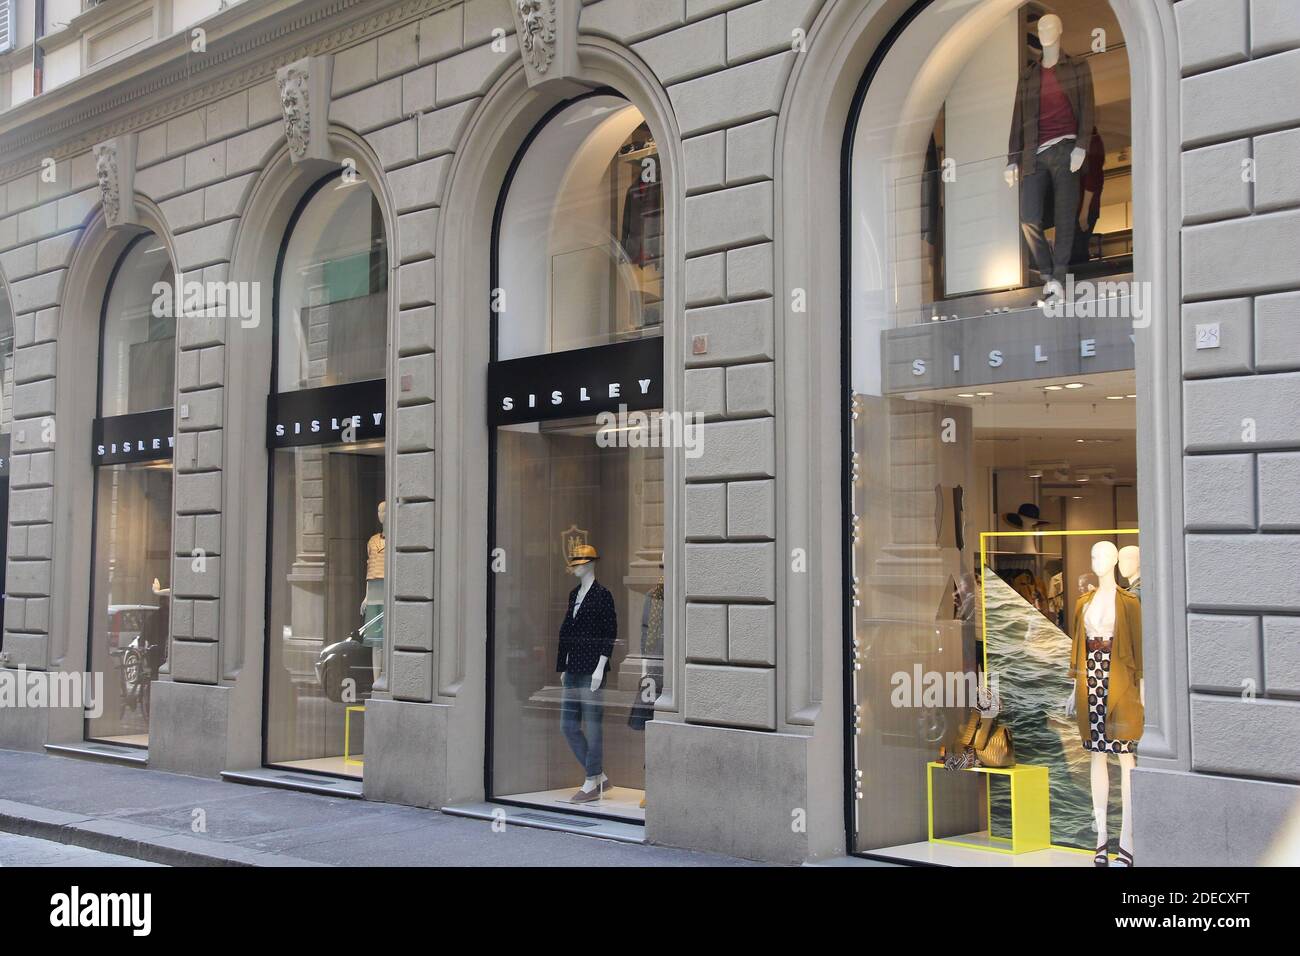 FLORENCE, ITALY - APRIL 30, 2015: Sisley fashion store in Florence. Sisley  is owned by Benetton Group, Italian fashion company Stock Photo - Alamy